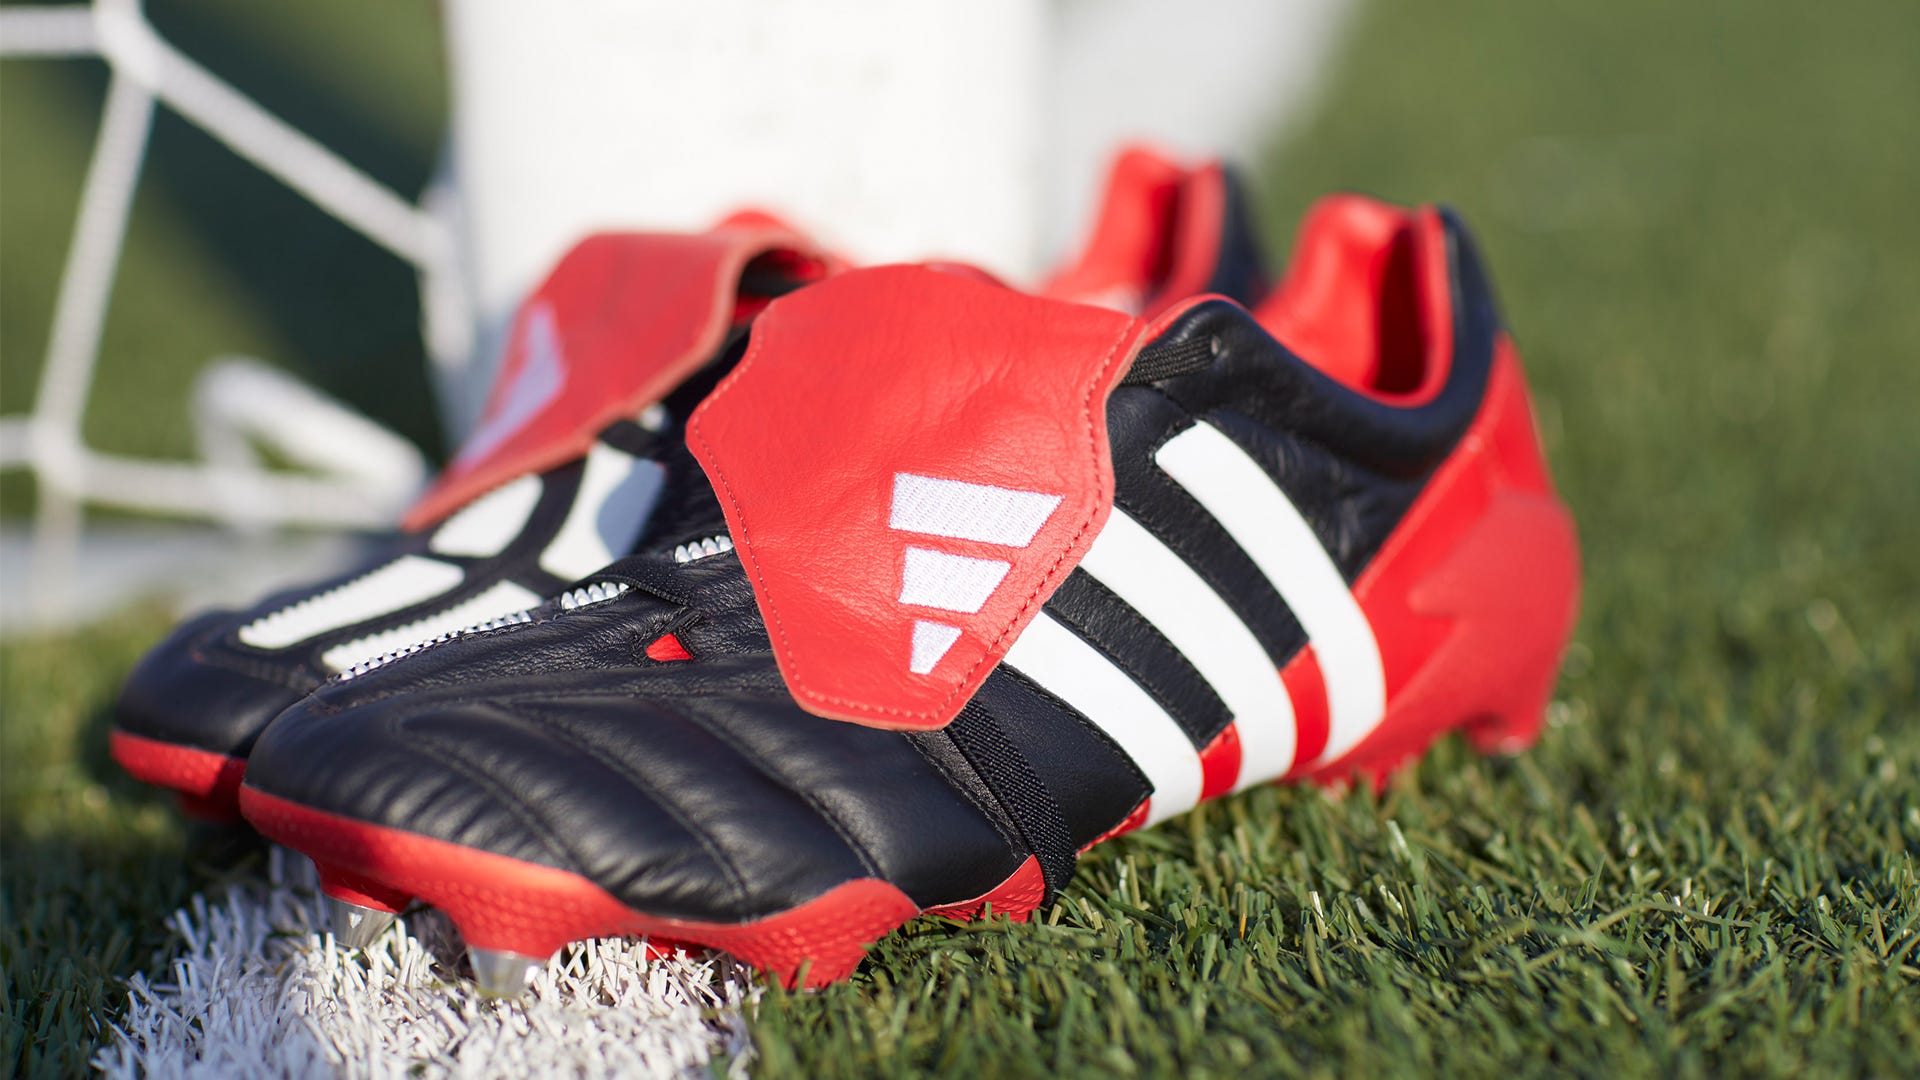 adidas 2002 Predator Mania: Boots made famous by are back | Goal.com US